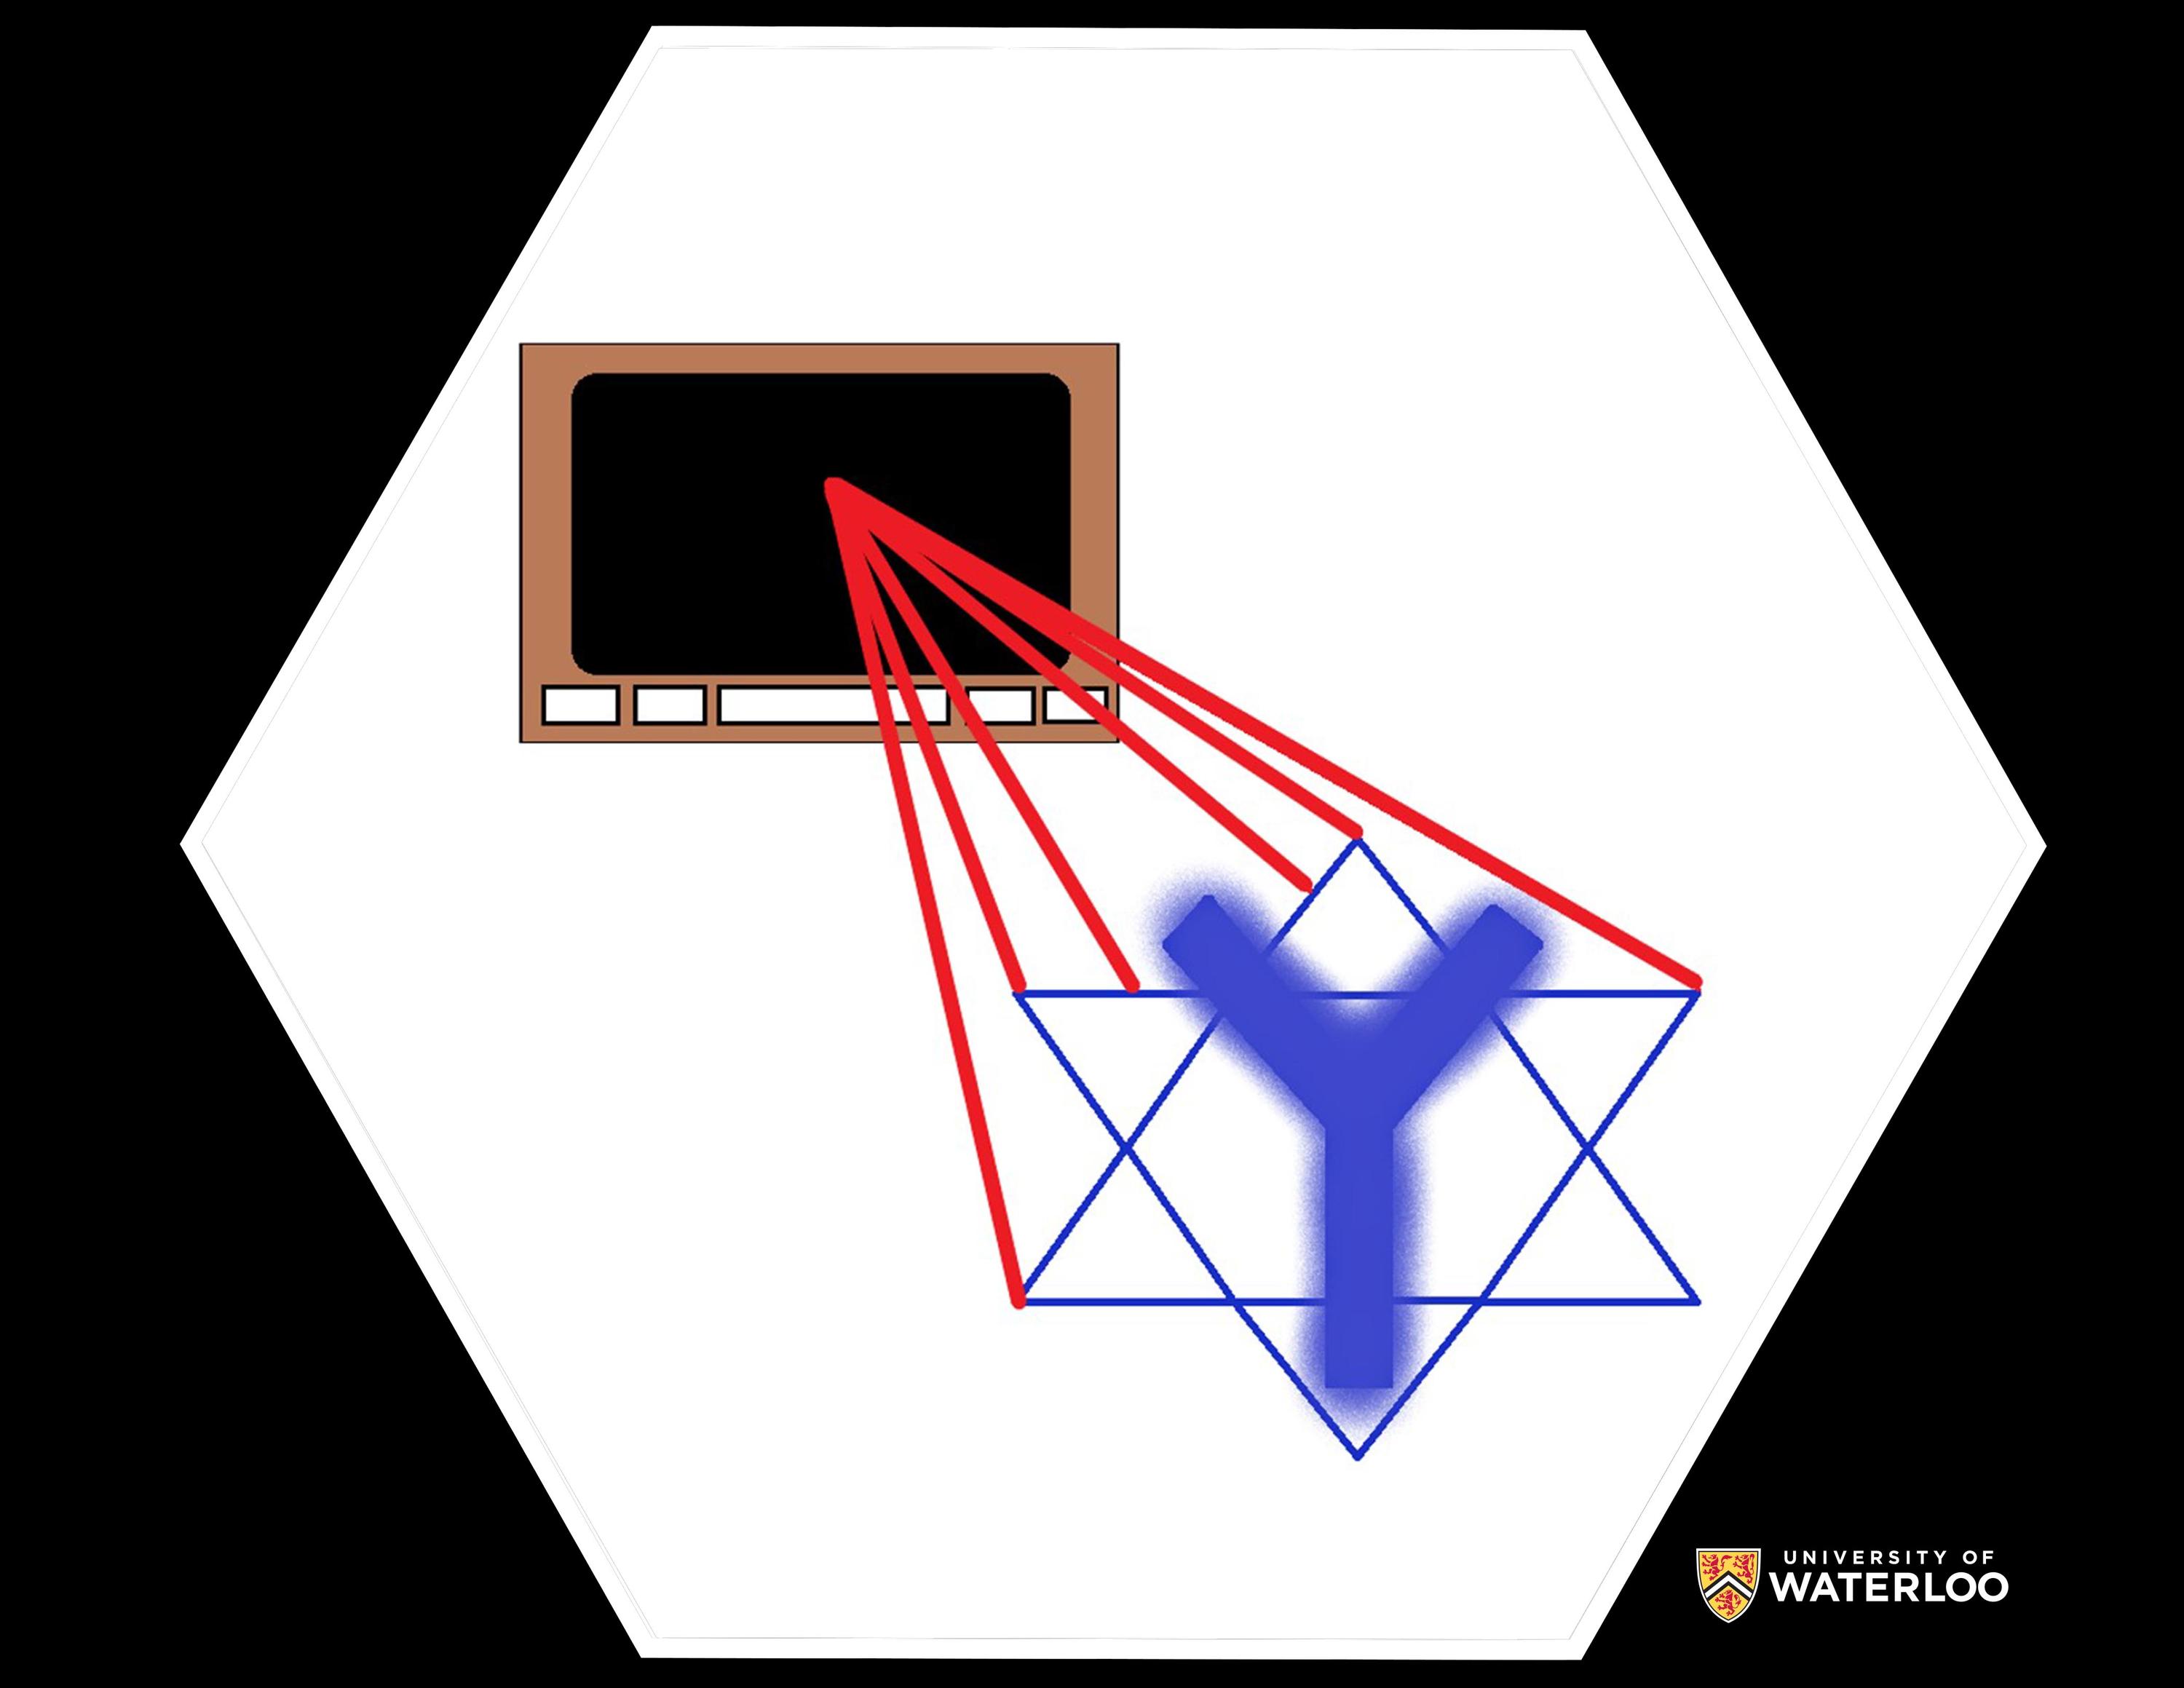 Digital image on white background. A TV emits laser beams terminating with the blue Star of David and the chemical symbol “Y” in the middle.